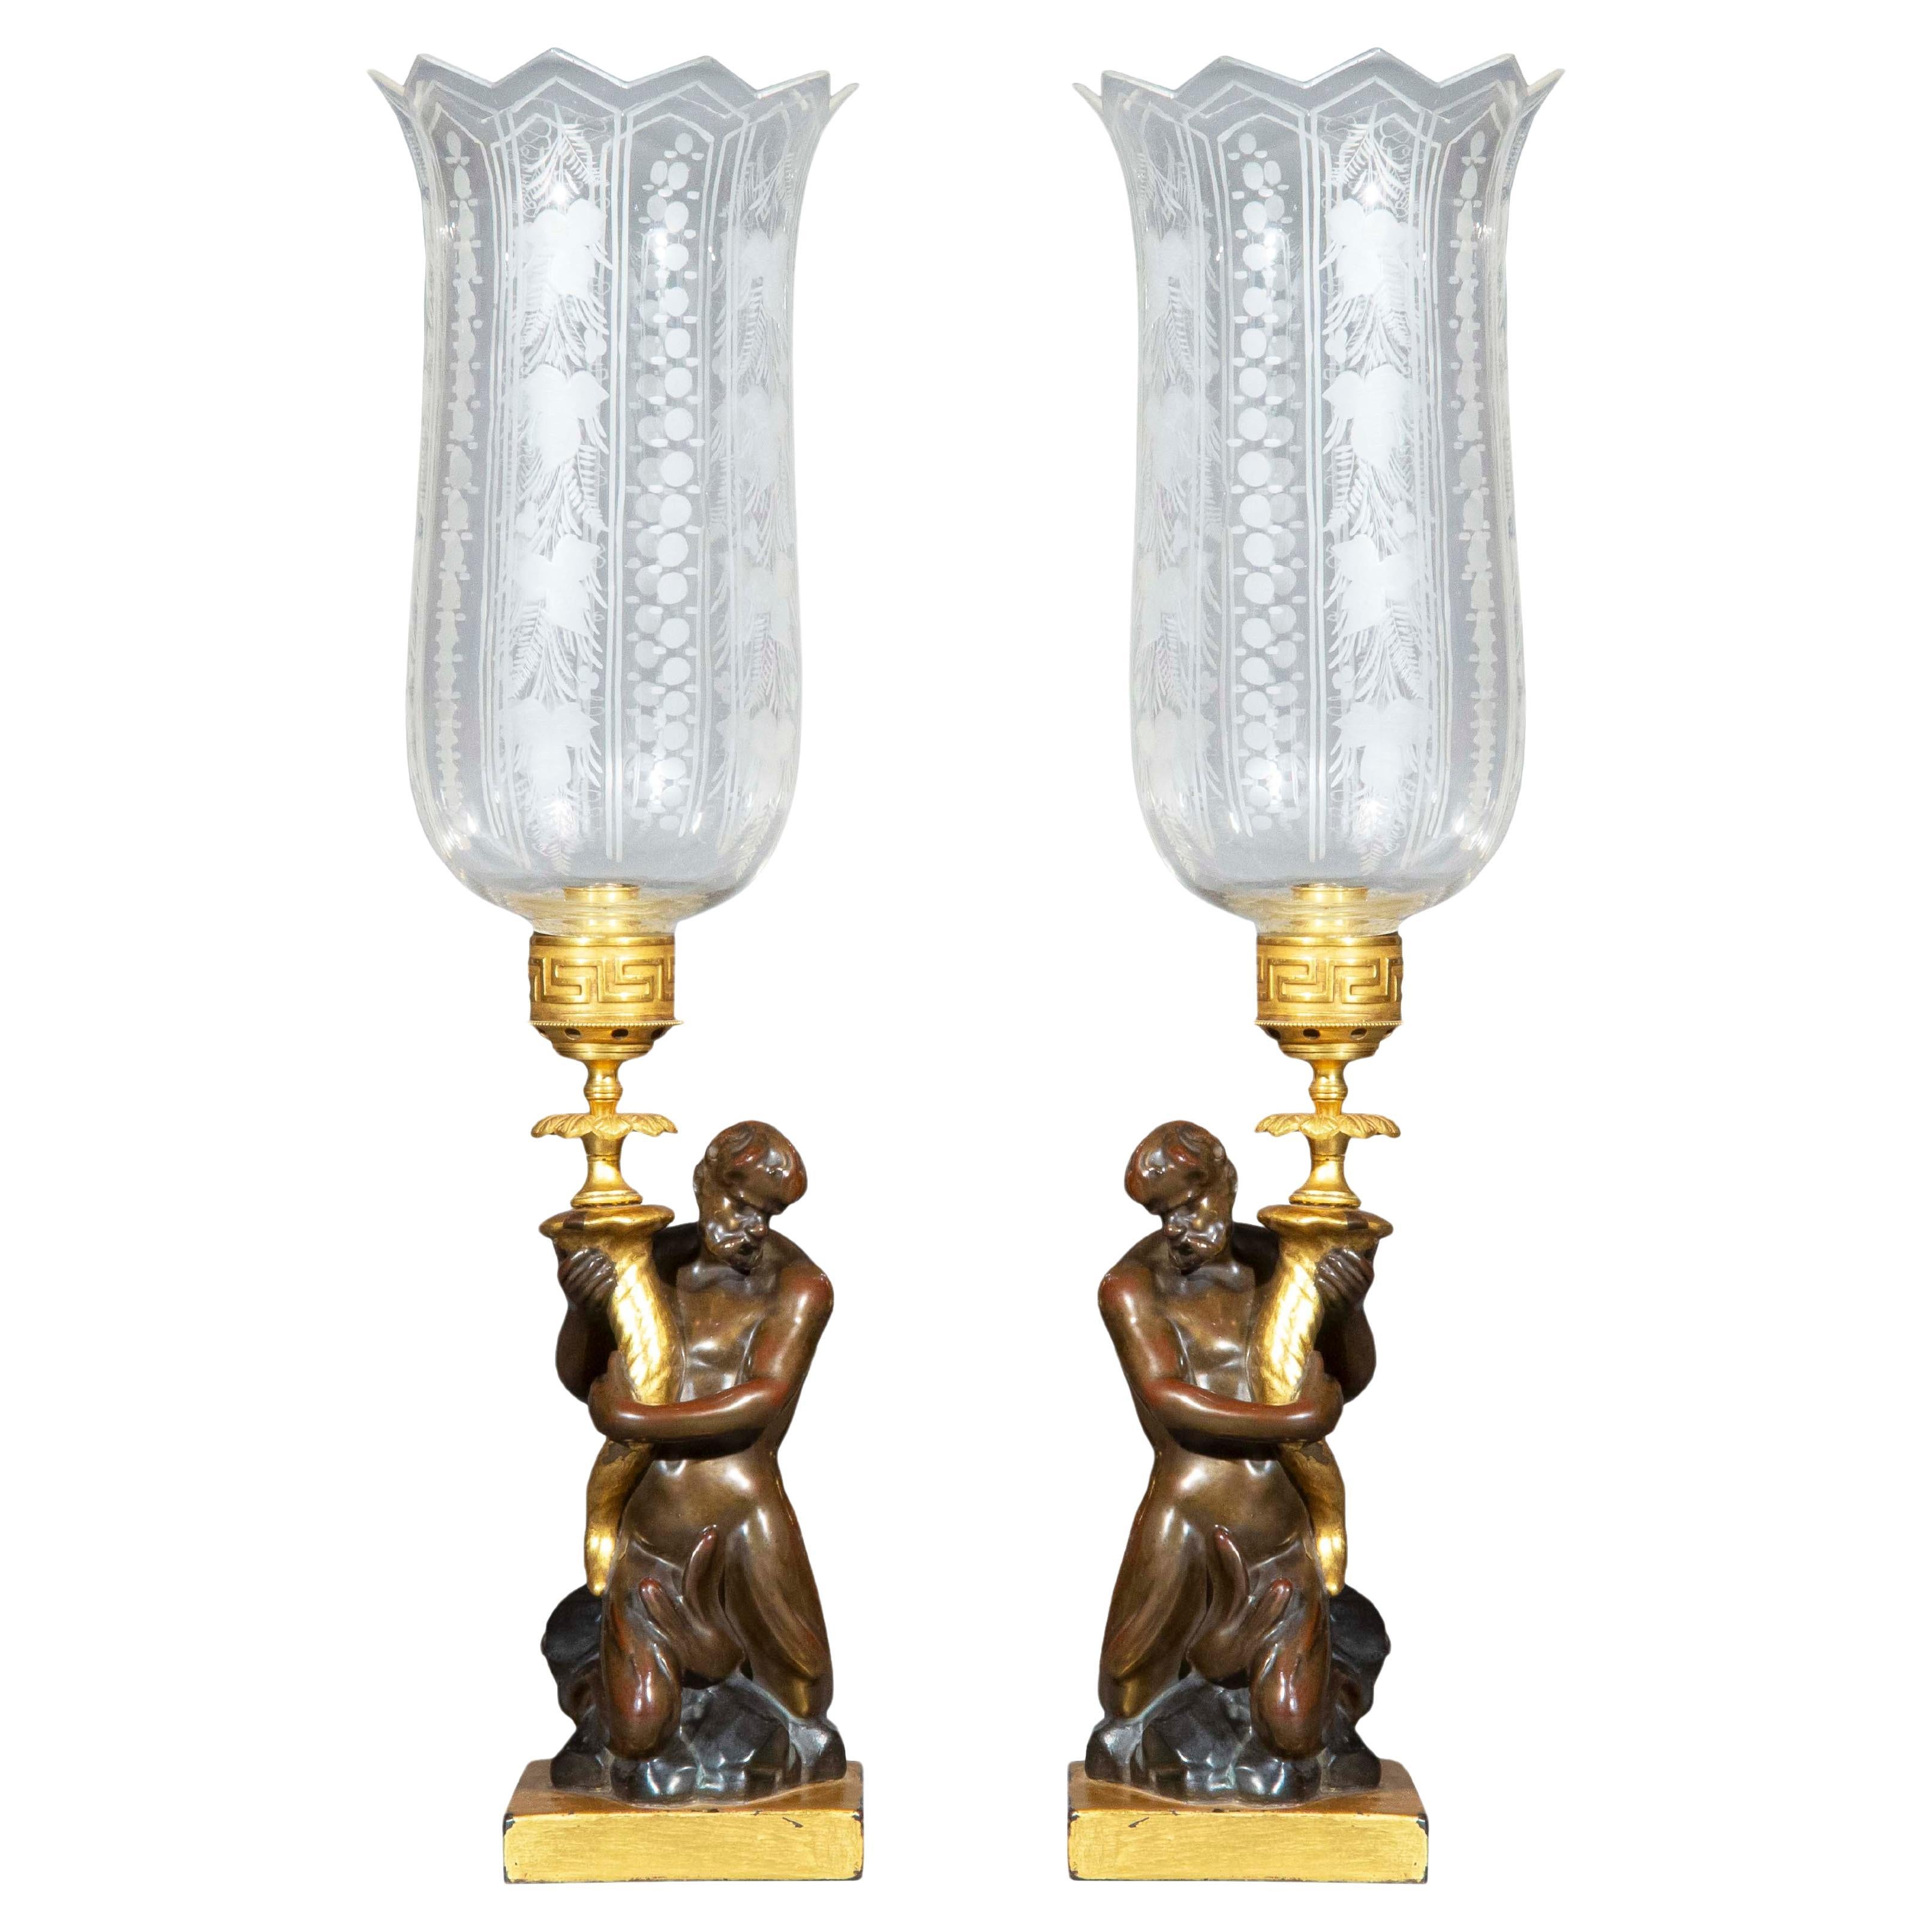 Pair of Early 19th Century Triton Candlesticks Storm Lanterns by Wood & Caldwell For Sale